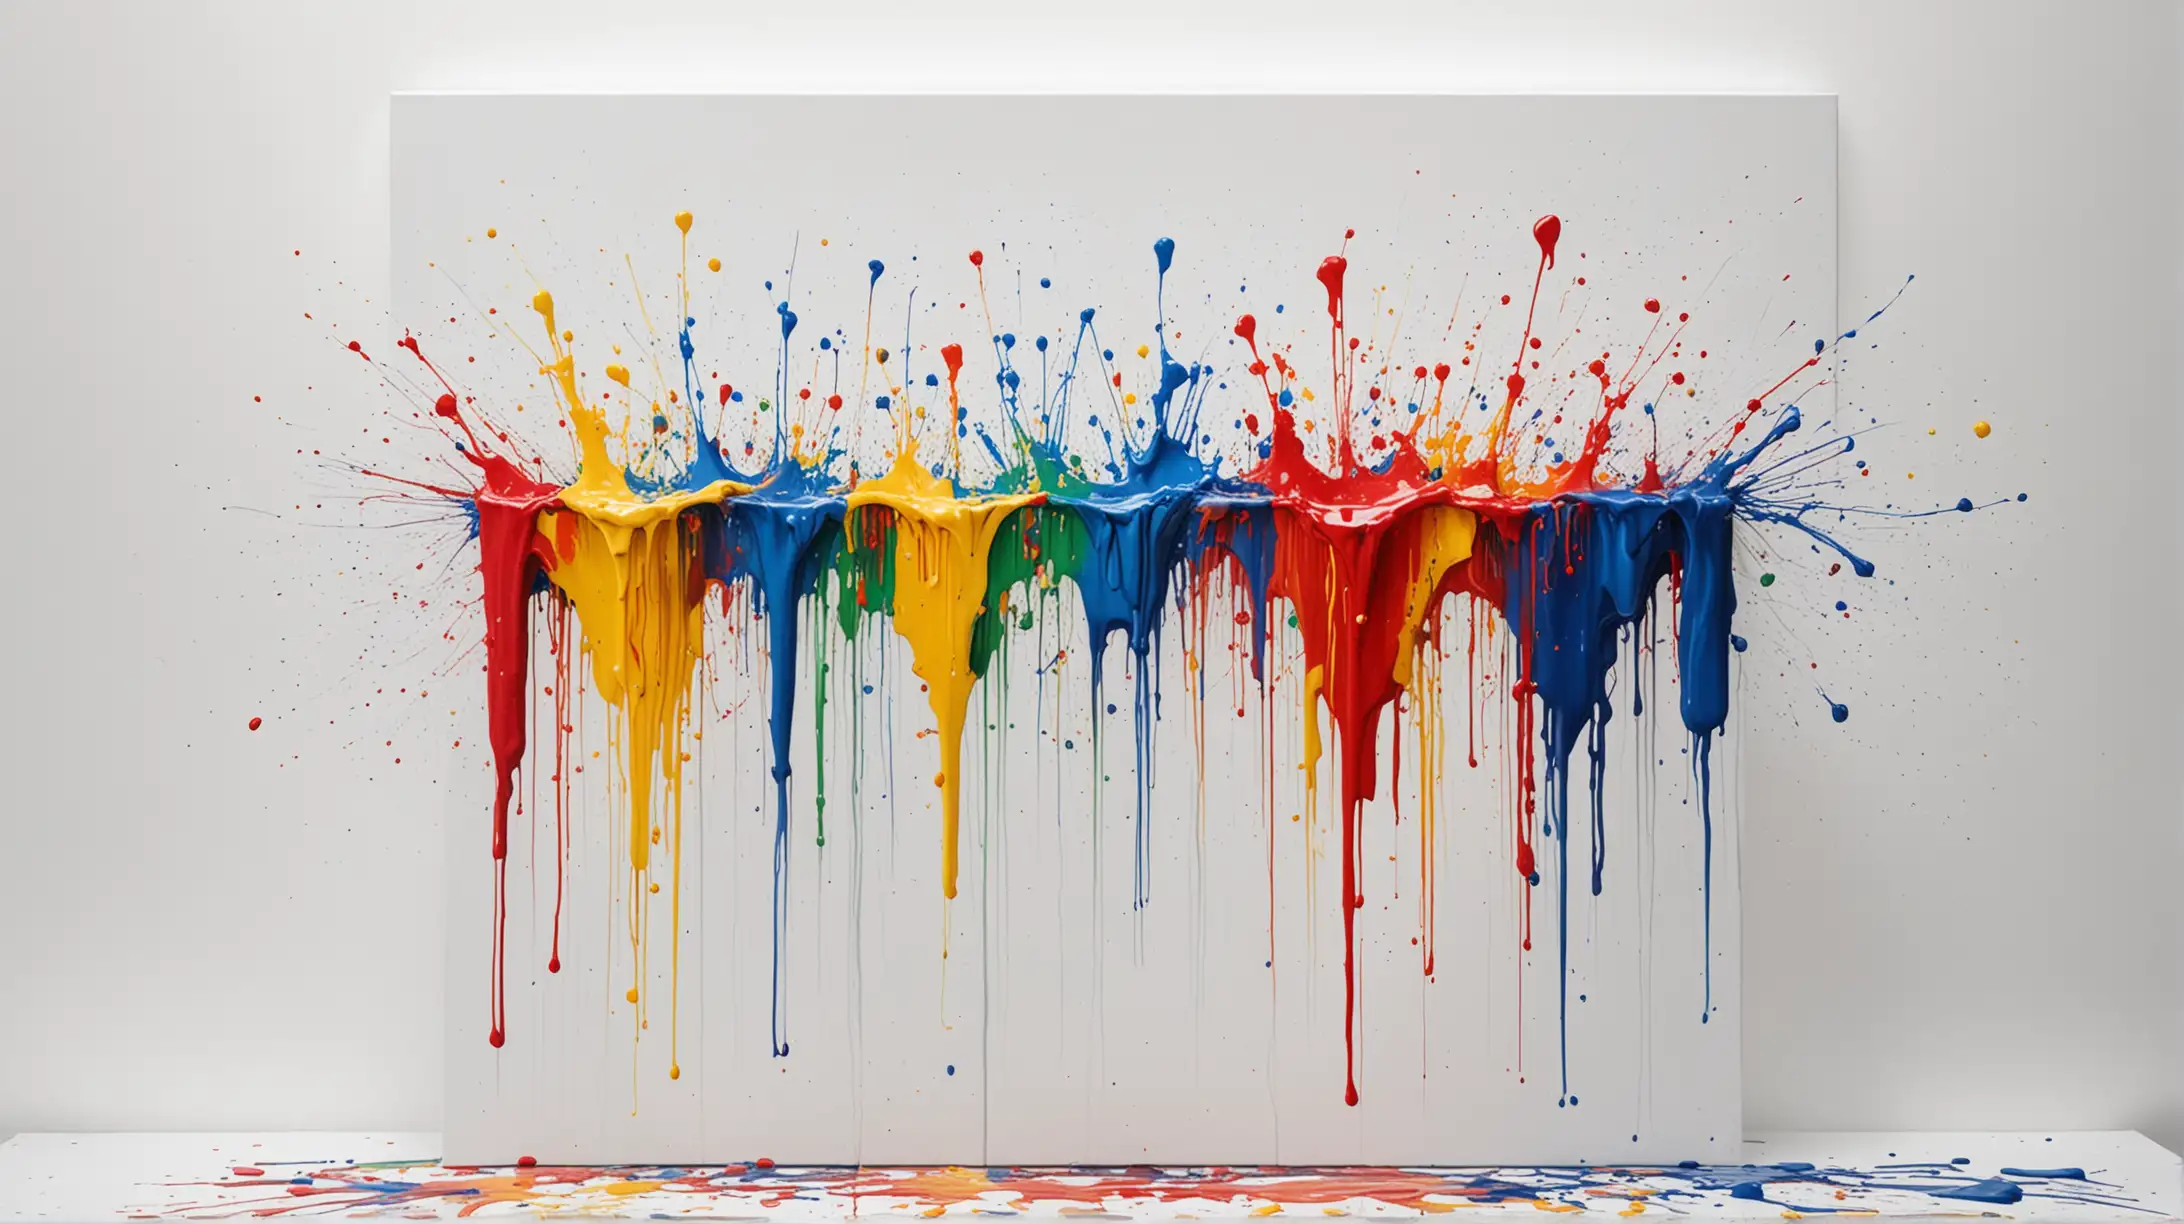 Vibrant Primary Color Splash Abstract Painting on White Background with Dripping Effect